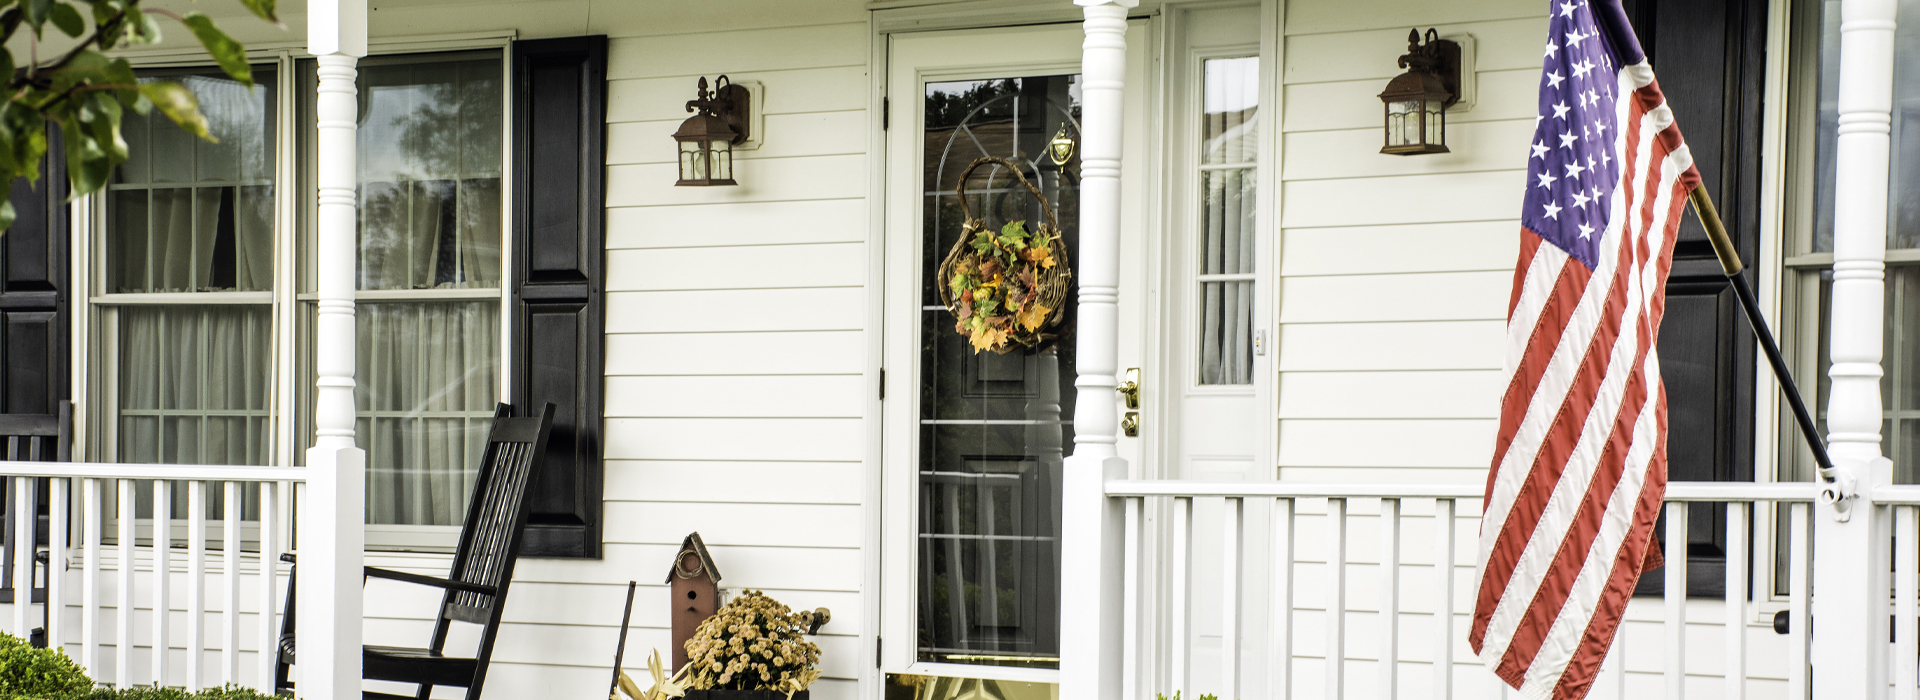 Colonial Revival style front porch